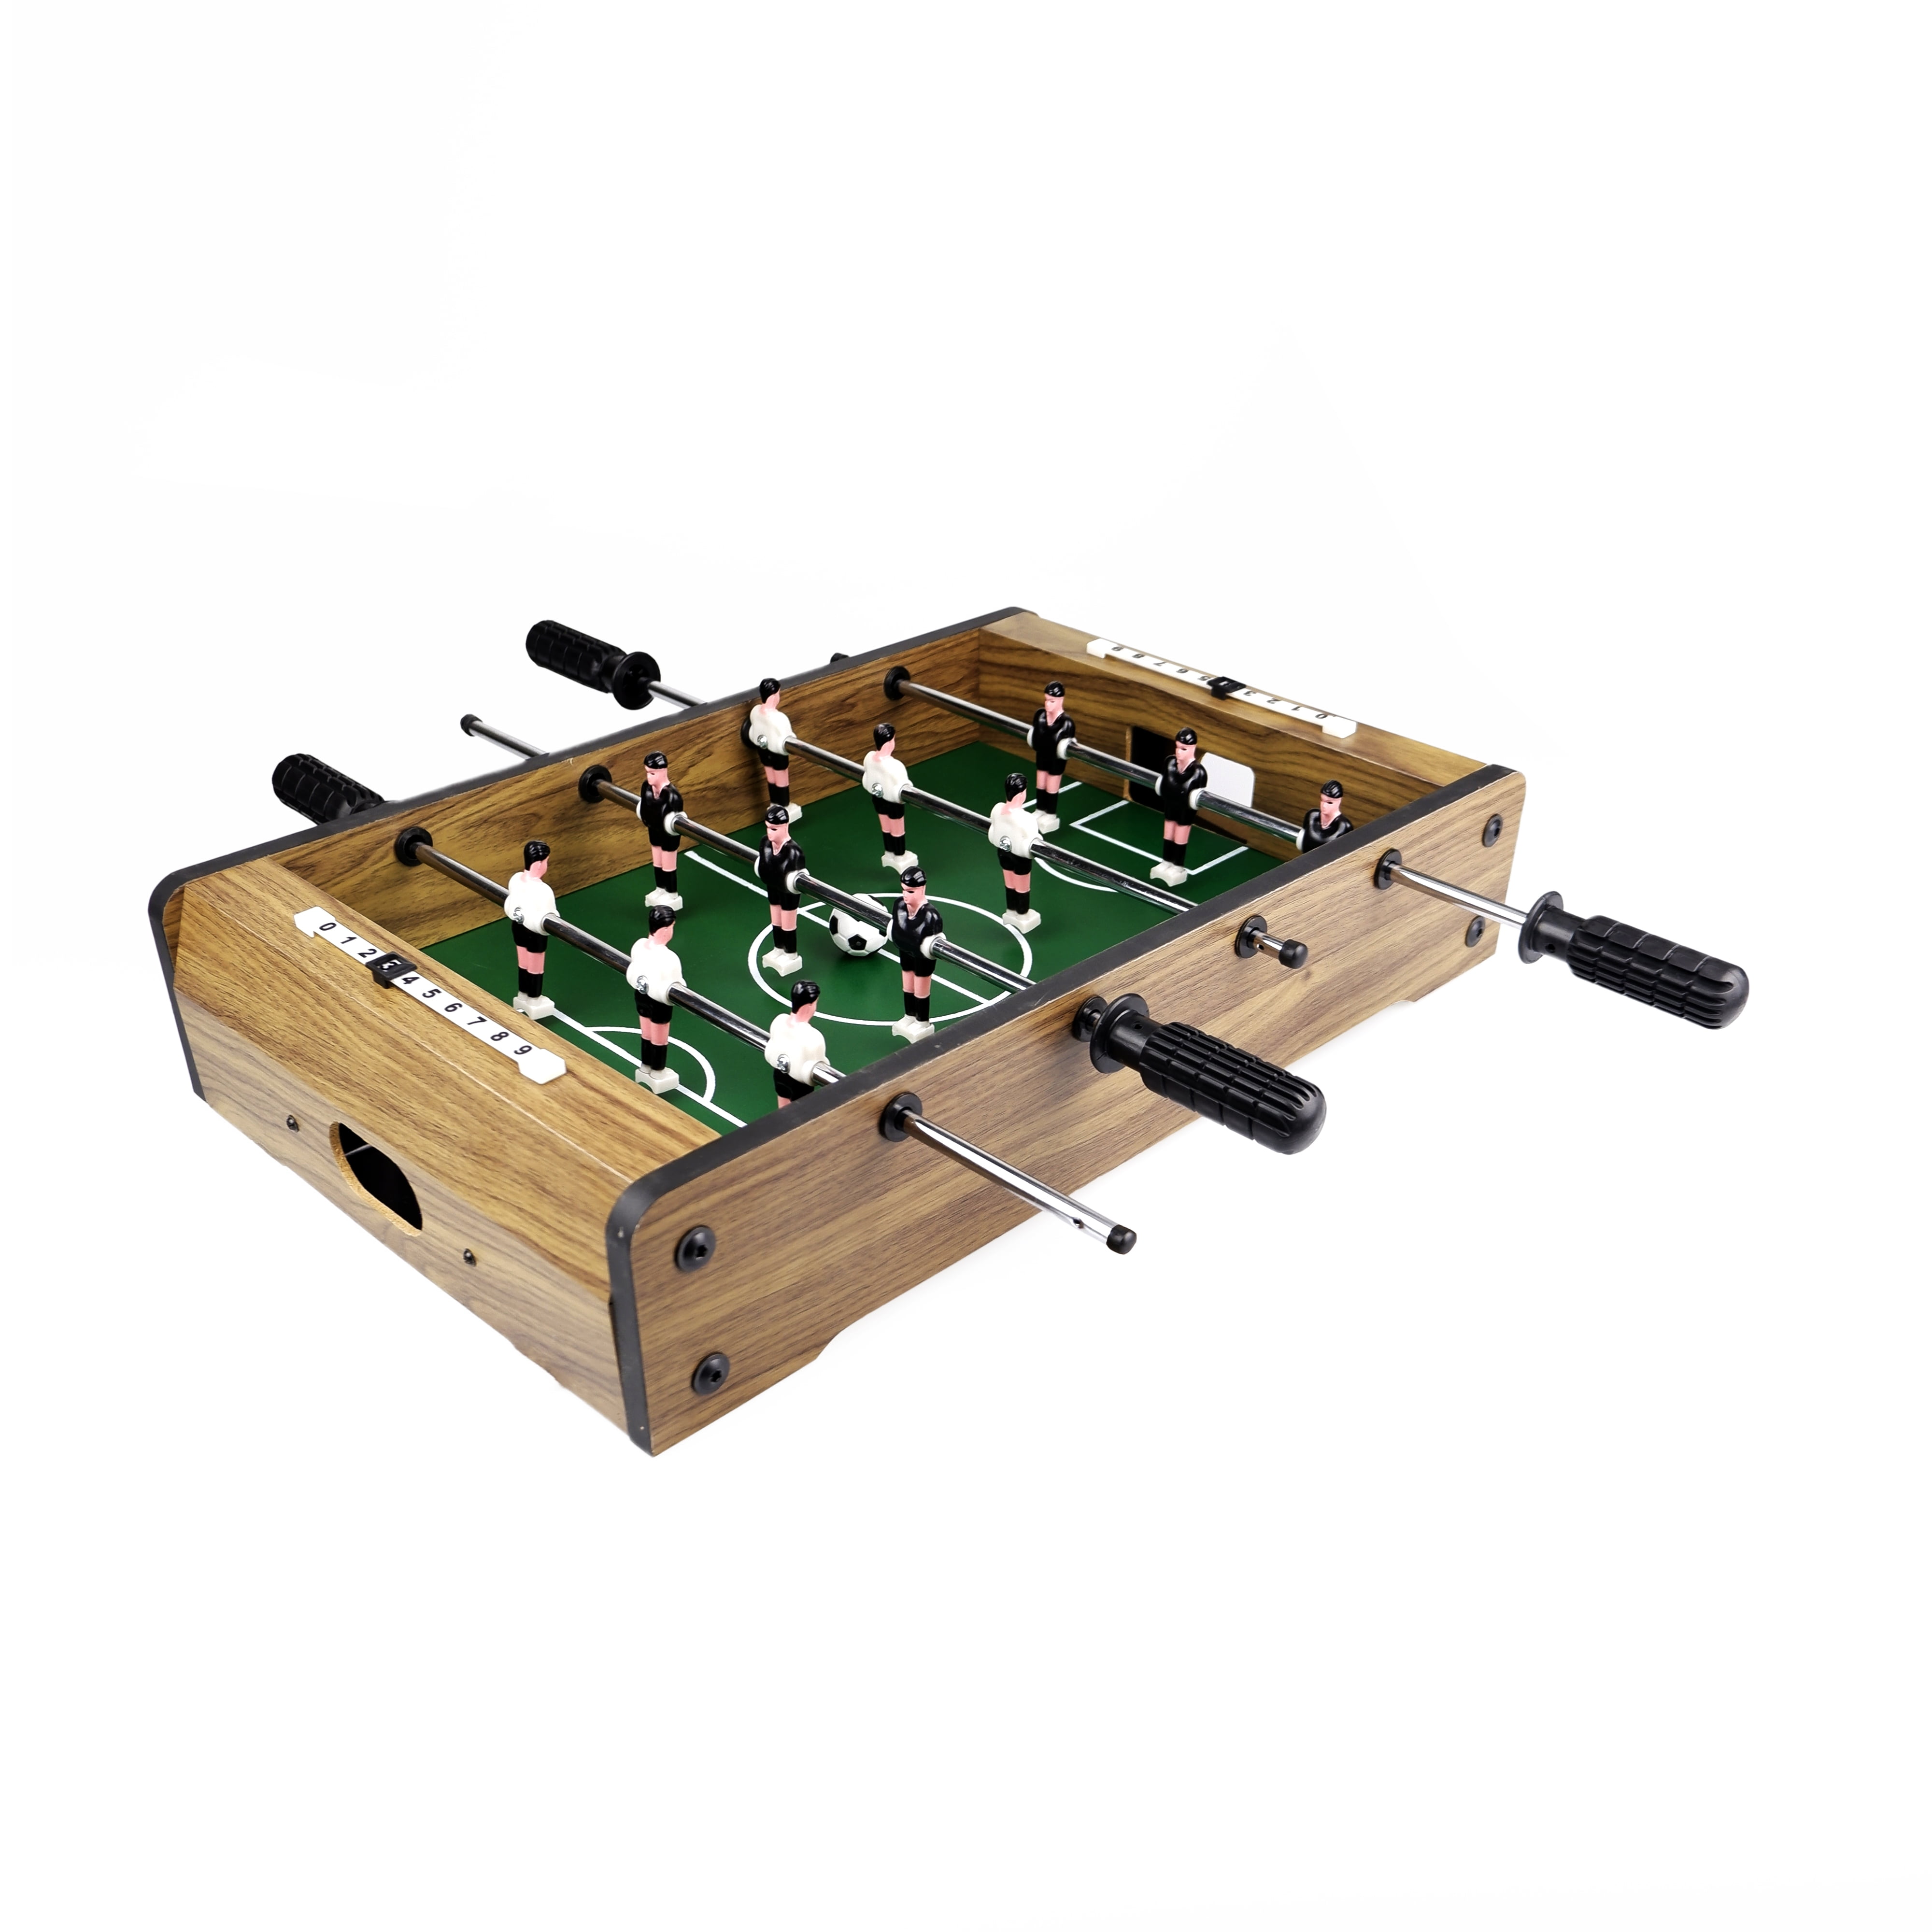 Lonabr Foosball Table Arcades Game Portable Indoor Wooden Soccer Set Home Family 